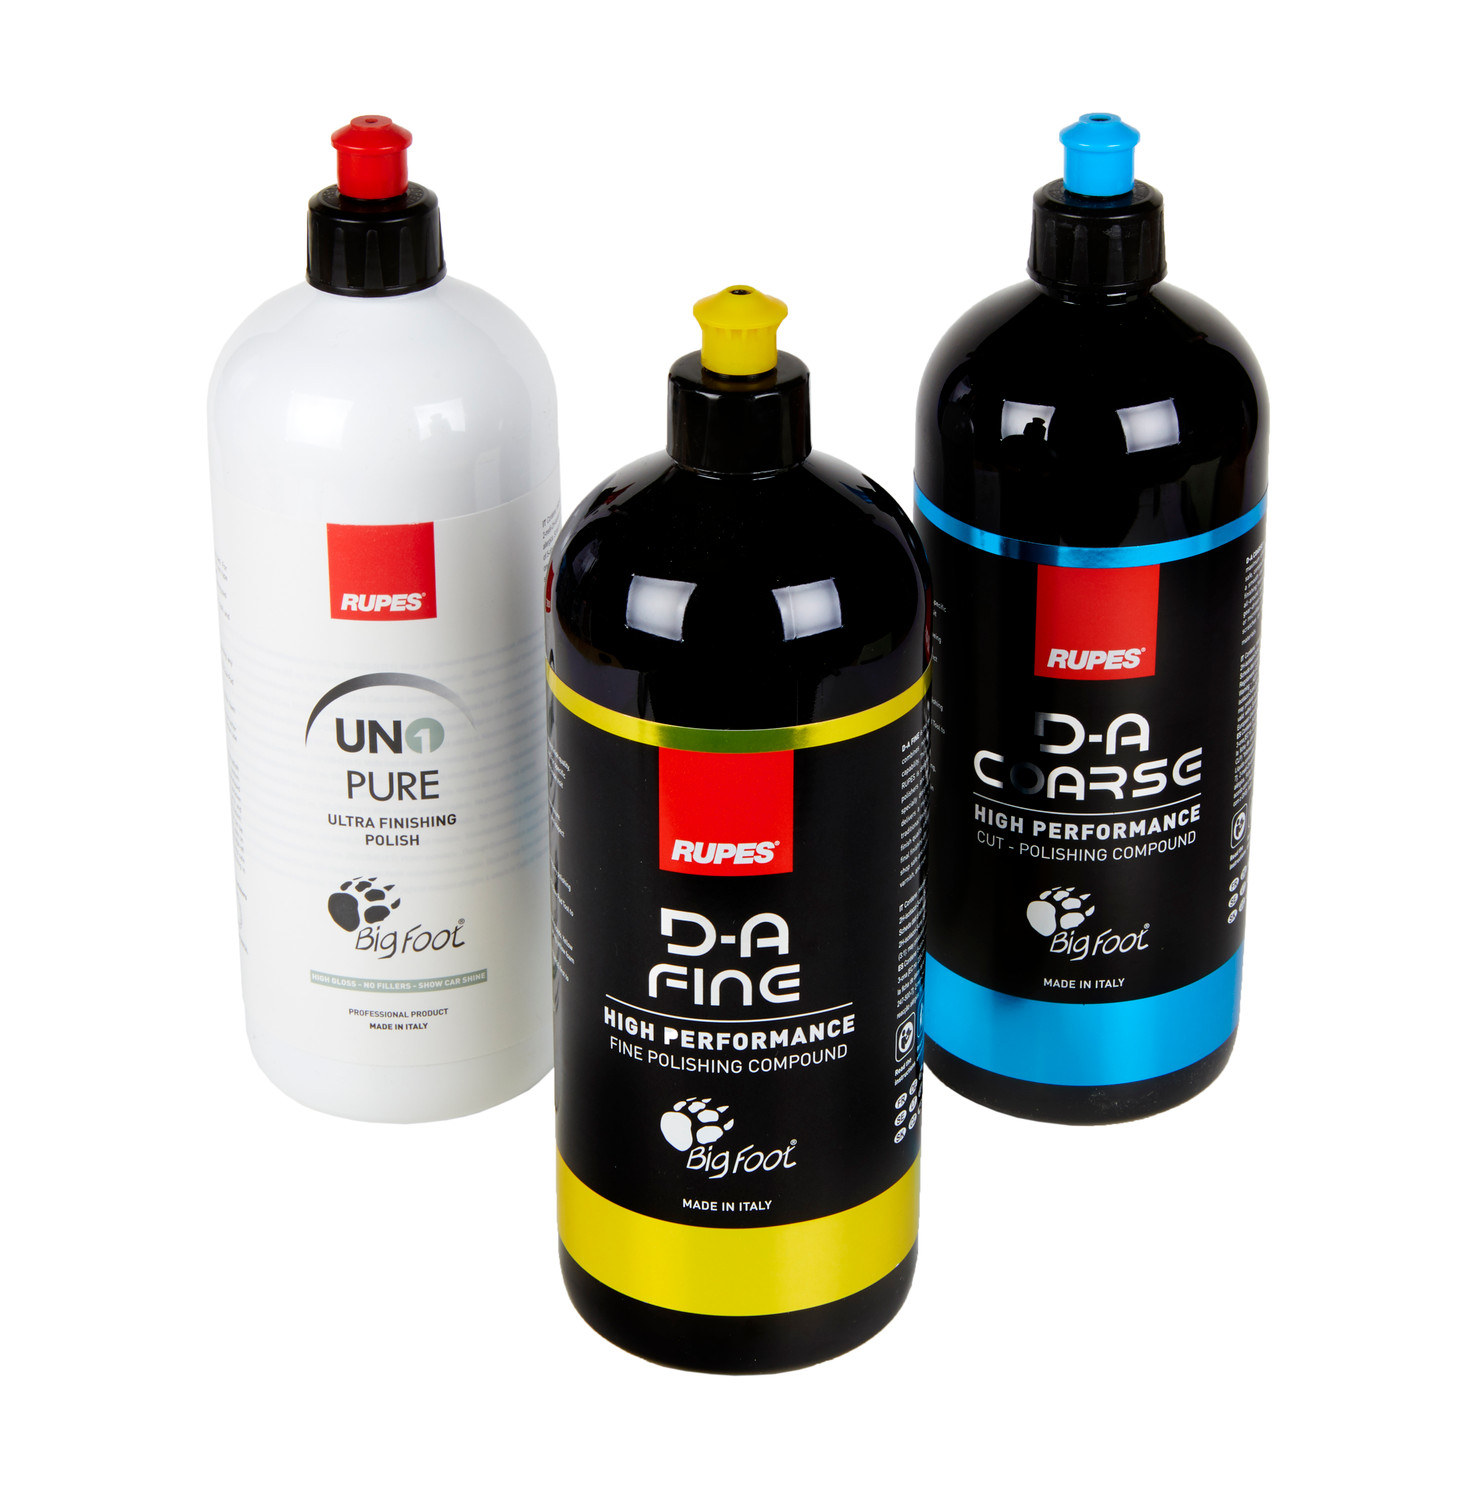 Premium Polishing Compound & Cleaner Kit, Specially Formulated for